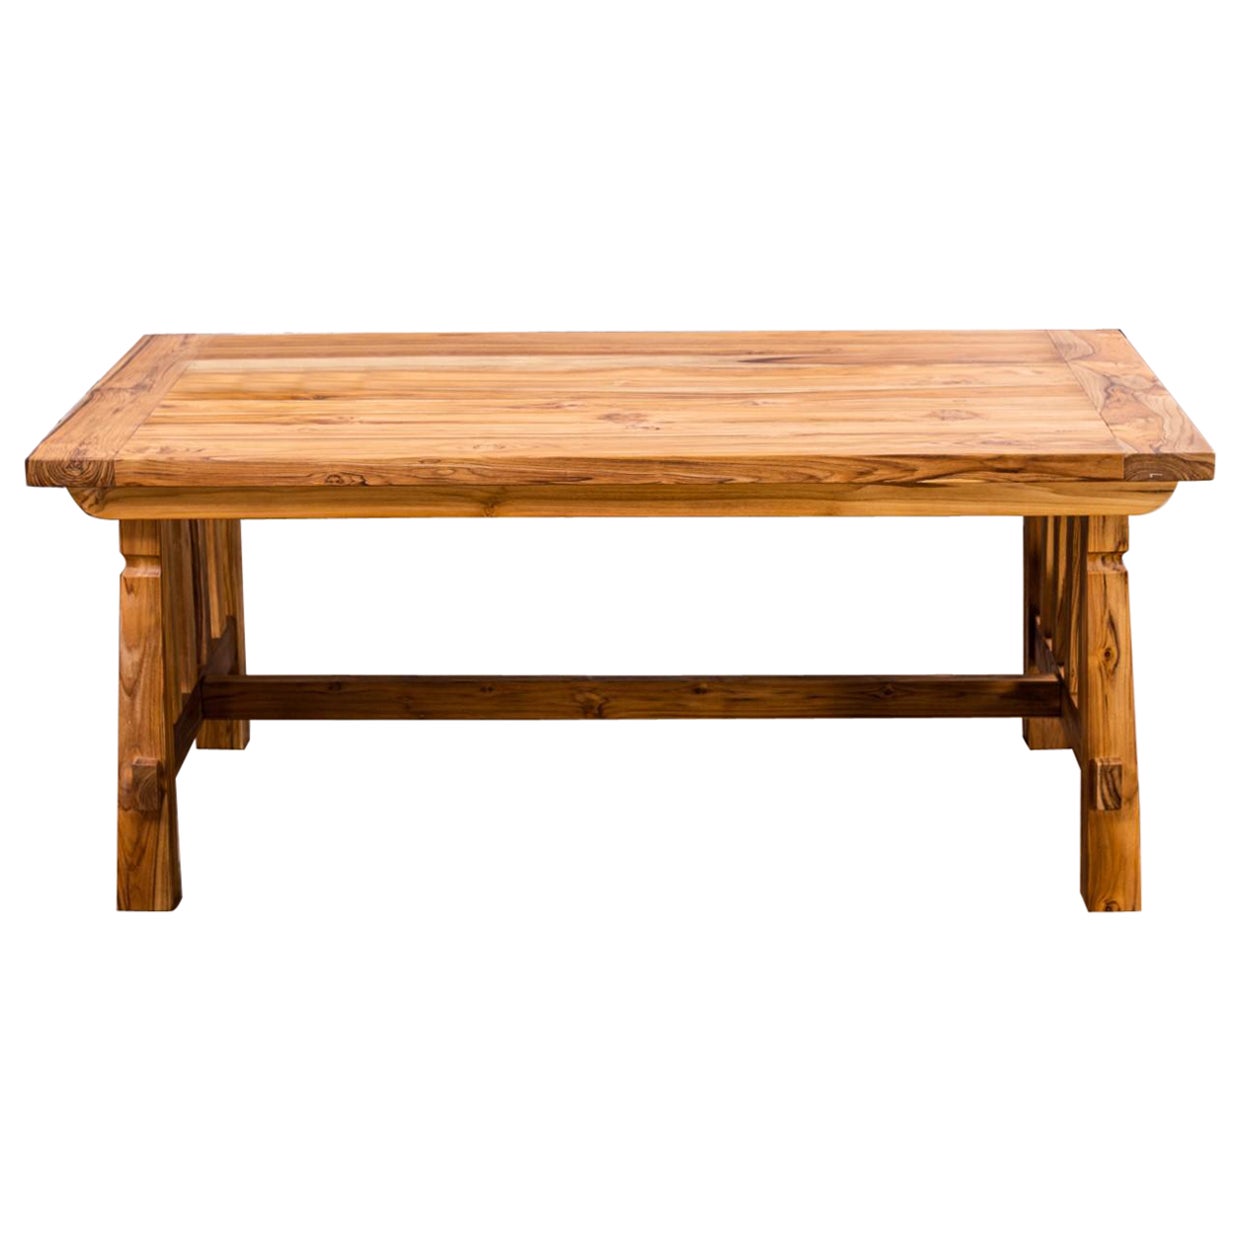 6' Solid Teak Sonora Dining Table in a Sandblasted Natural Finish For Sale